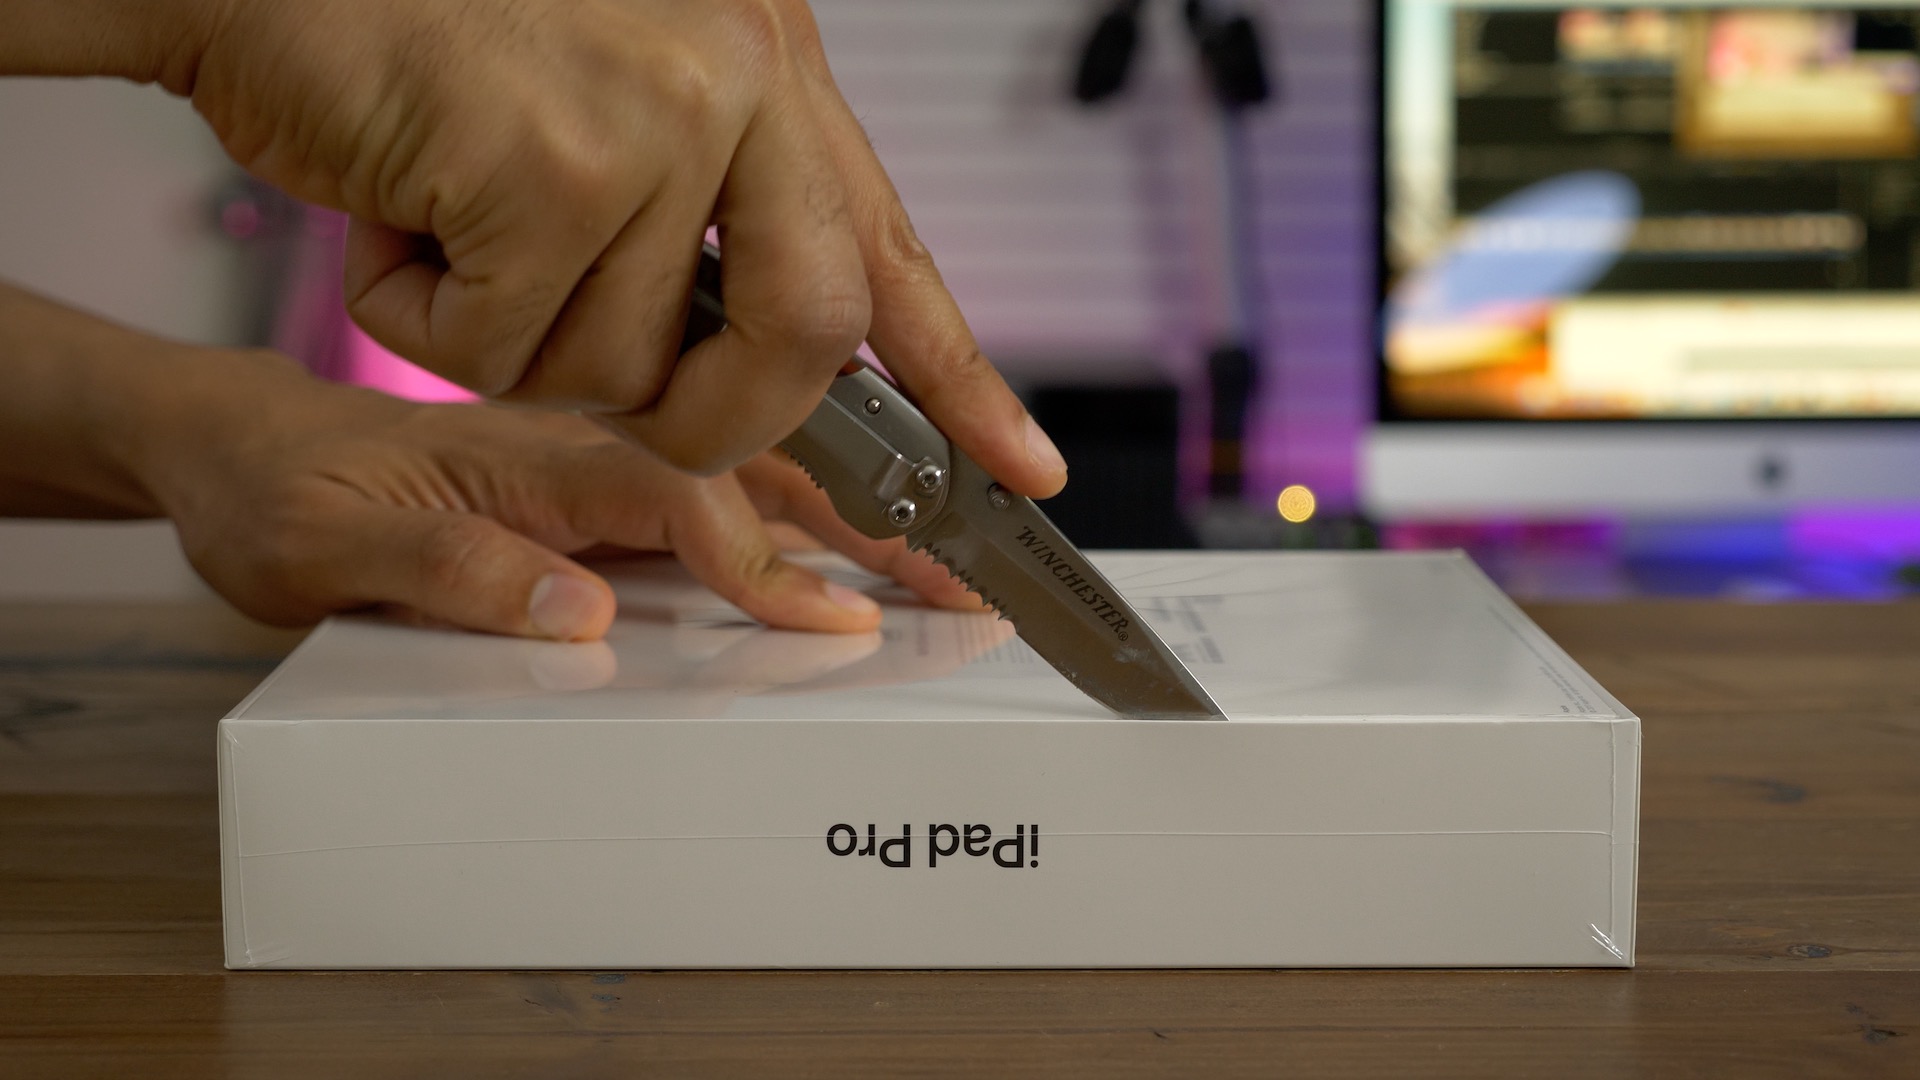 Hands-on: Apple Pencil unboxing with iPad Pro [Gallery] - 9to5Mac